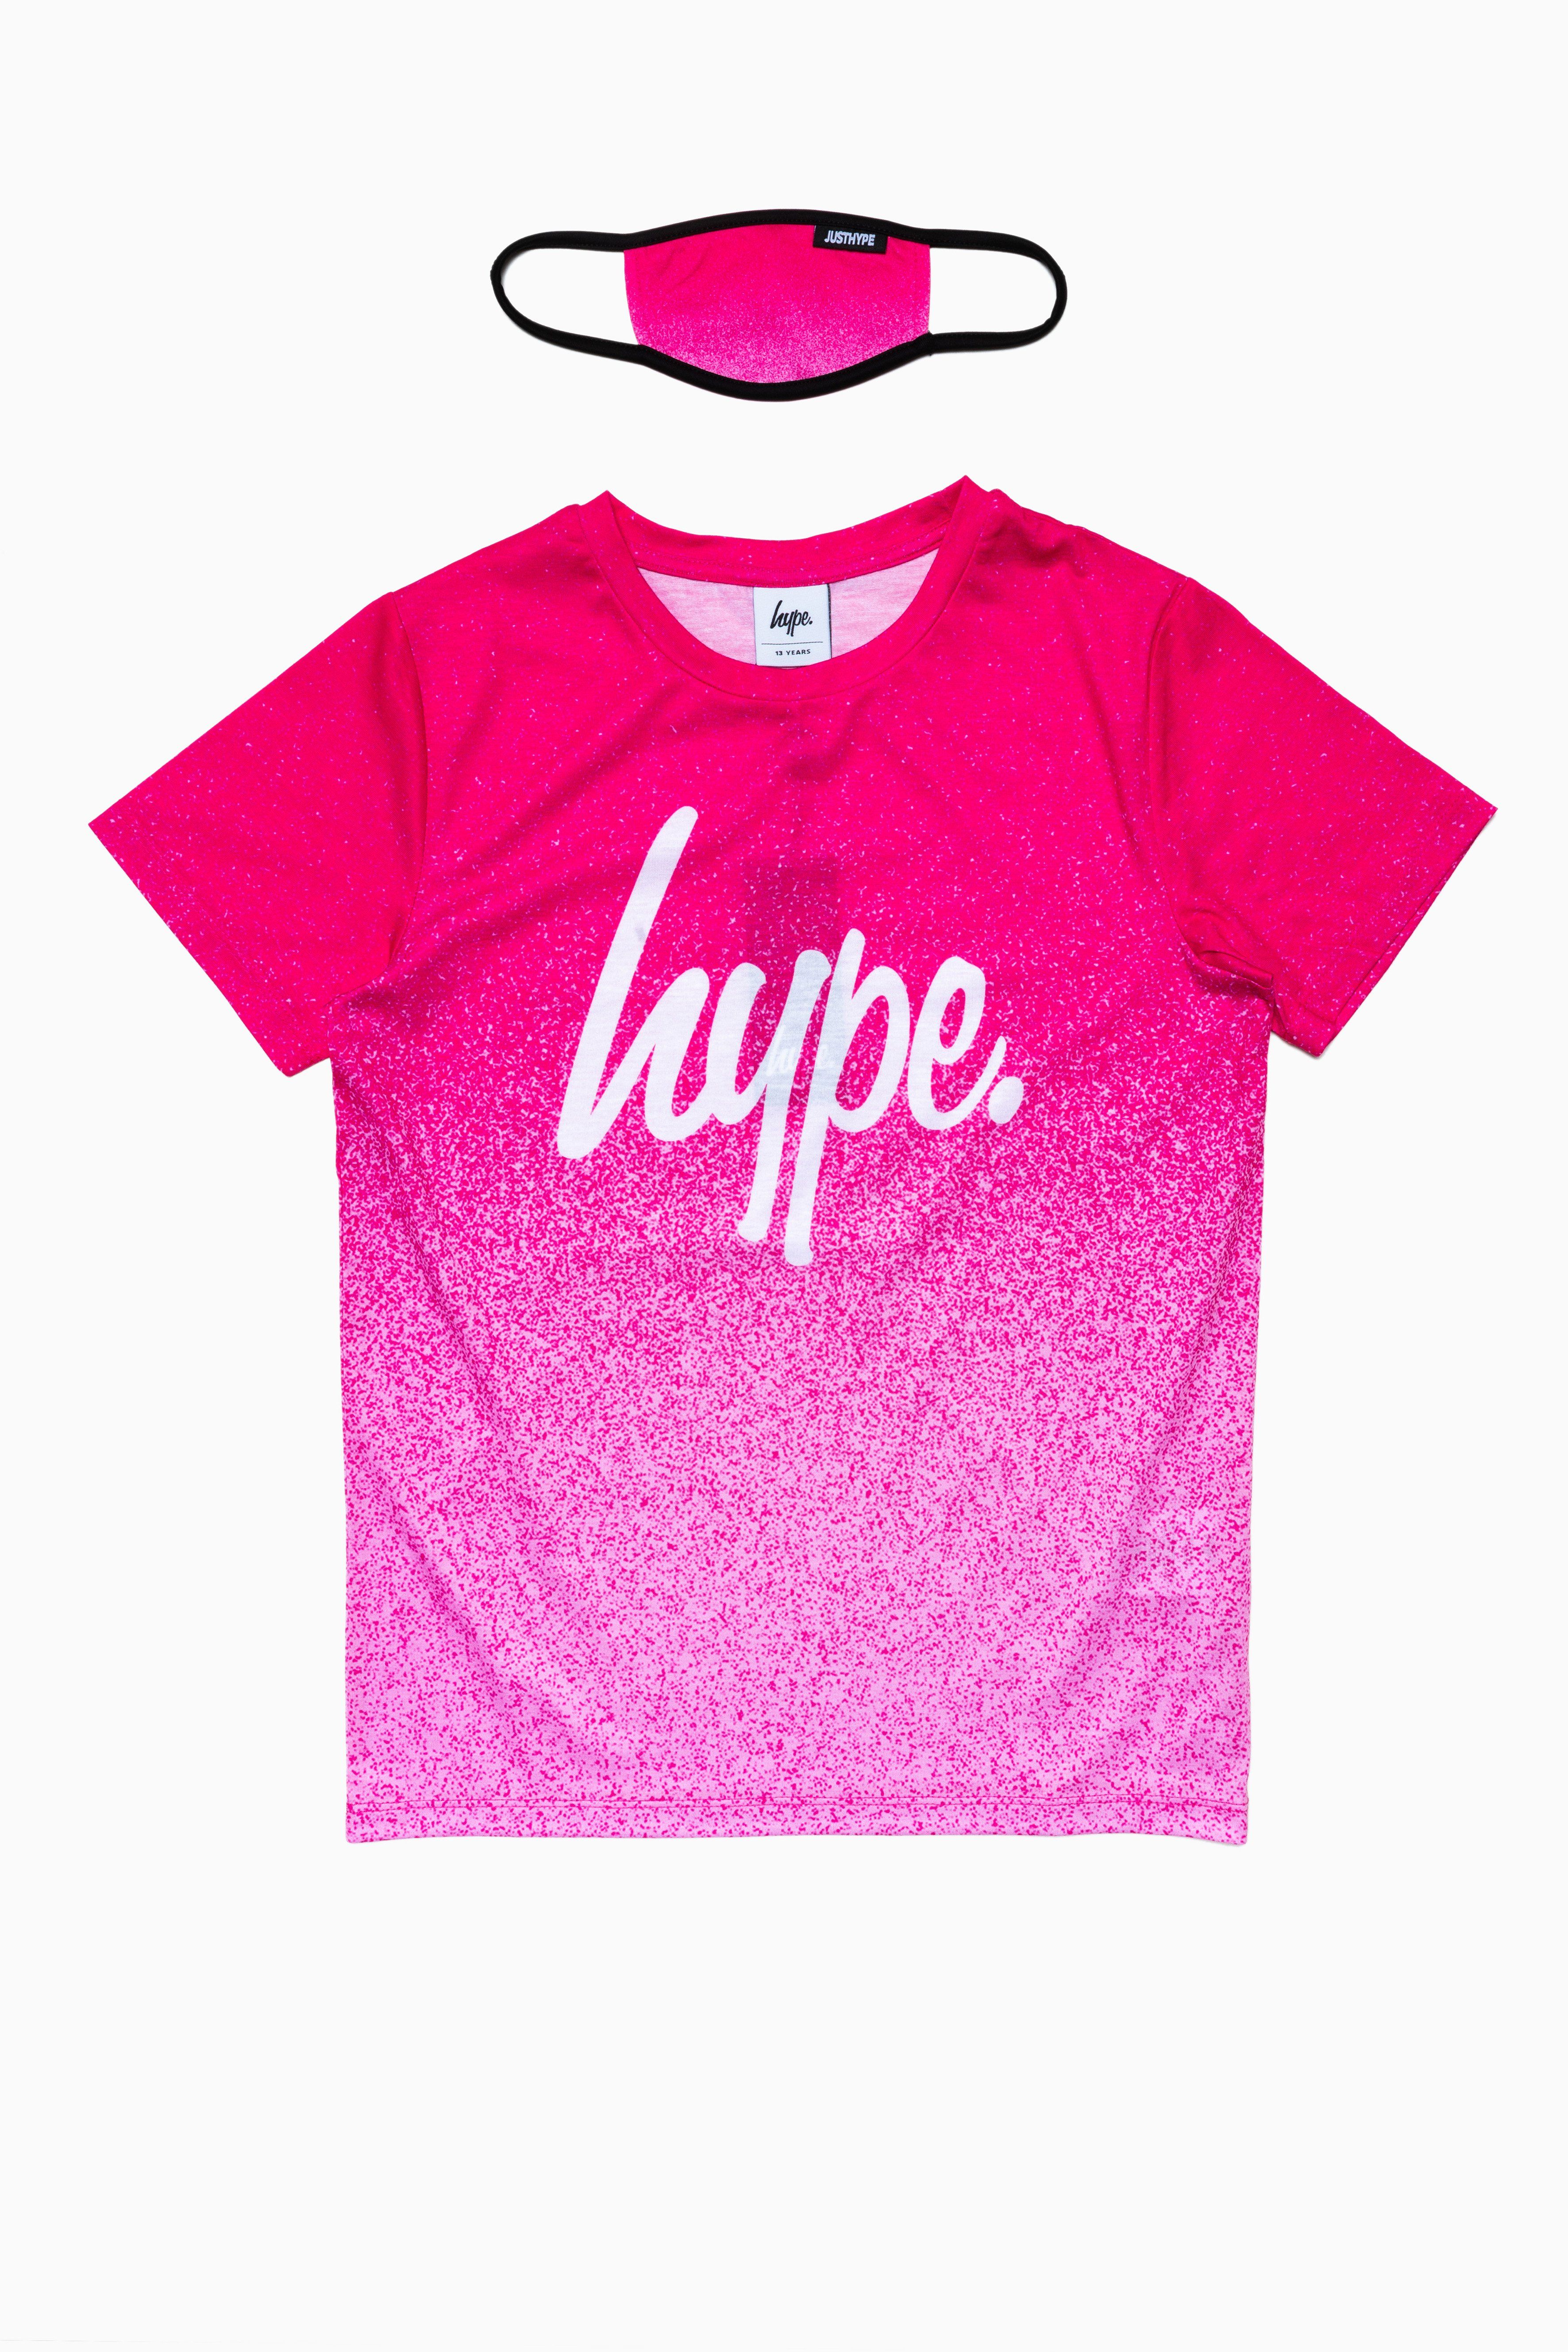 If you love pink, this is the combo you need to add to your everyday 'drobe. The HYPE. kids pink speckle t-shirt and face mask set, perfect for those who love to co-ordinate. Designed in our iconic speckle fade print in a pink and white colour palette. The T-shirt features our unisex standard t-shirt shape, with a crew neckline and short sleeves, finished with the supreme amount of comfort. The face masks is in a kids size, with an ear loop design in the perfect amount of comfort and breathing space you require. Machine wash at 30 degrees.